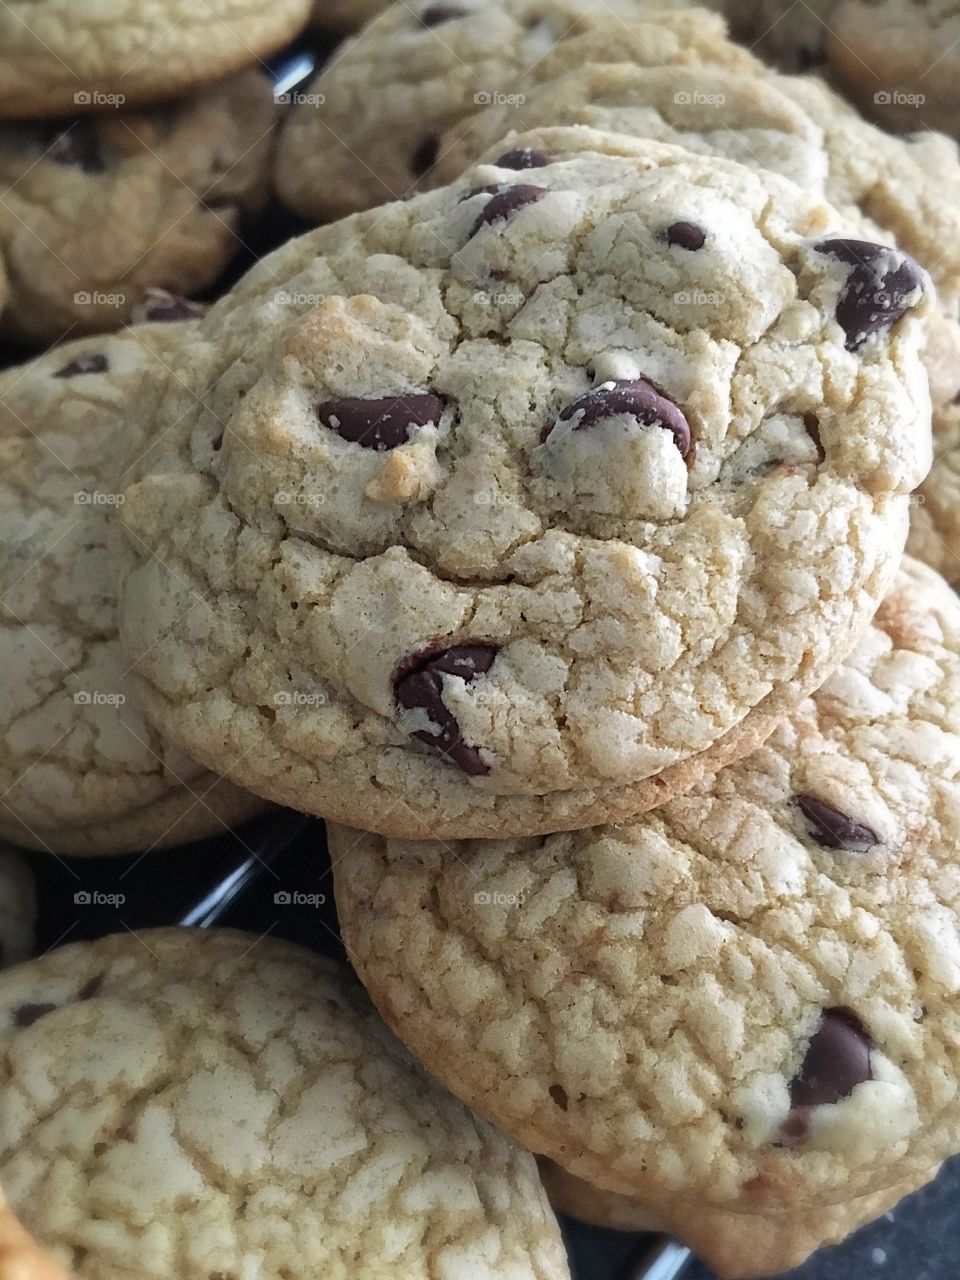 Chocolate chip cookie perfection